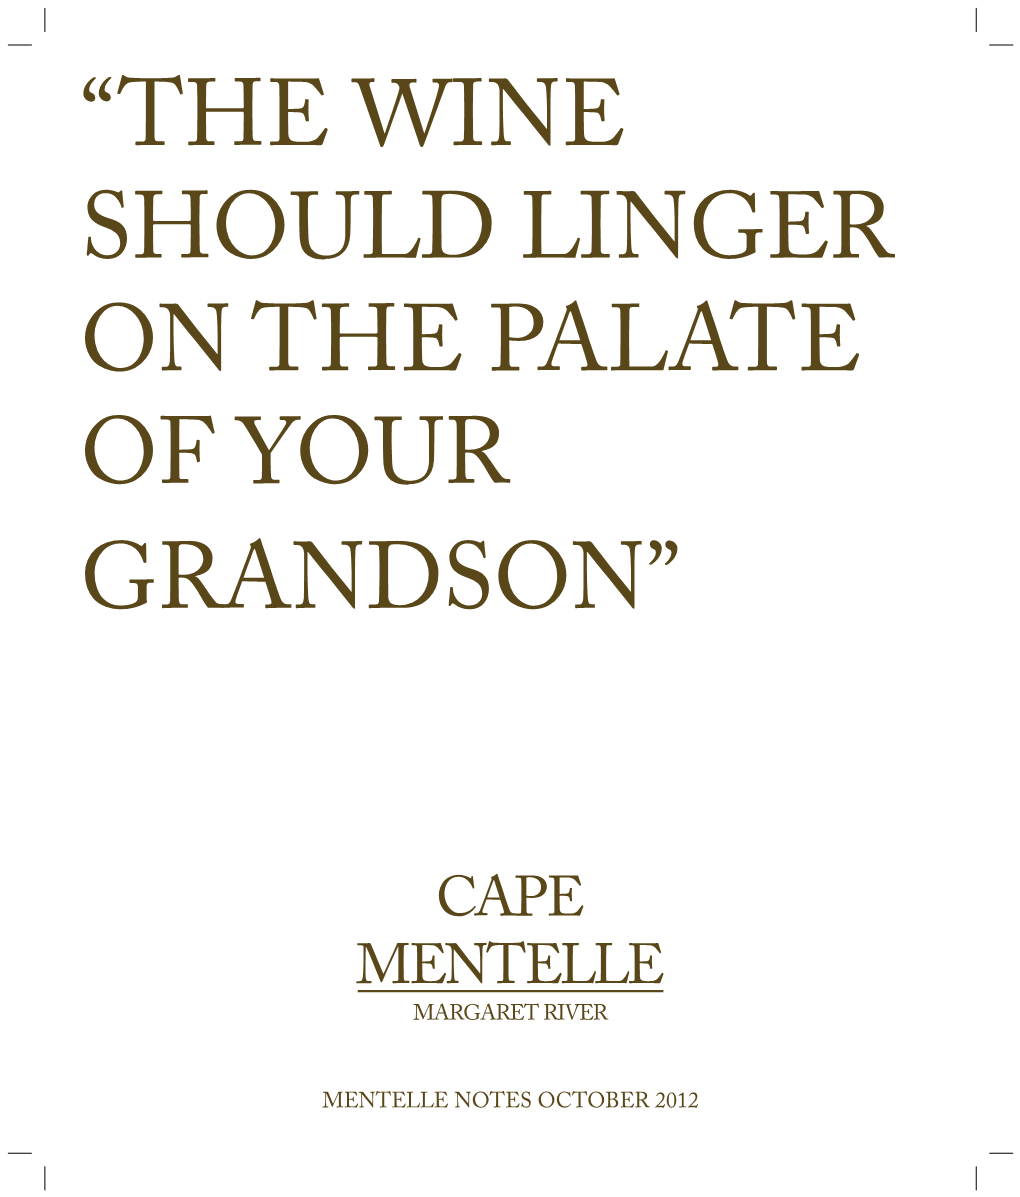 The Wine Should Linger on the Palate of Your Grandson”